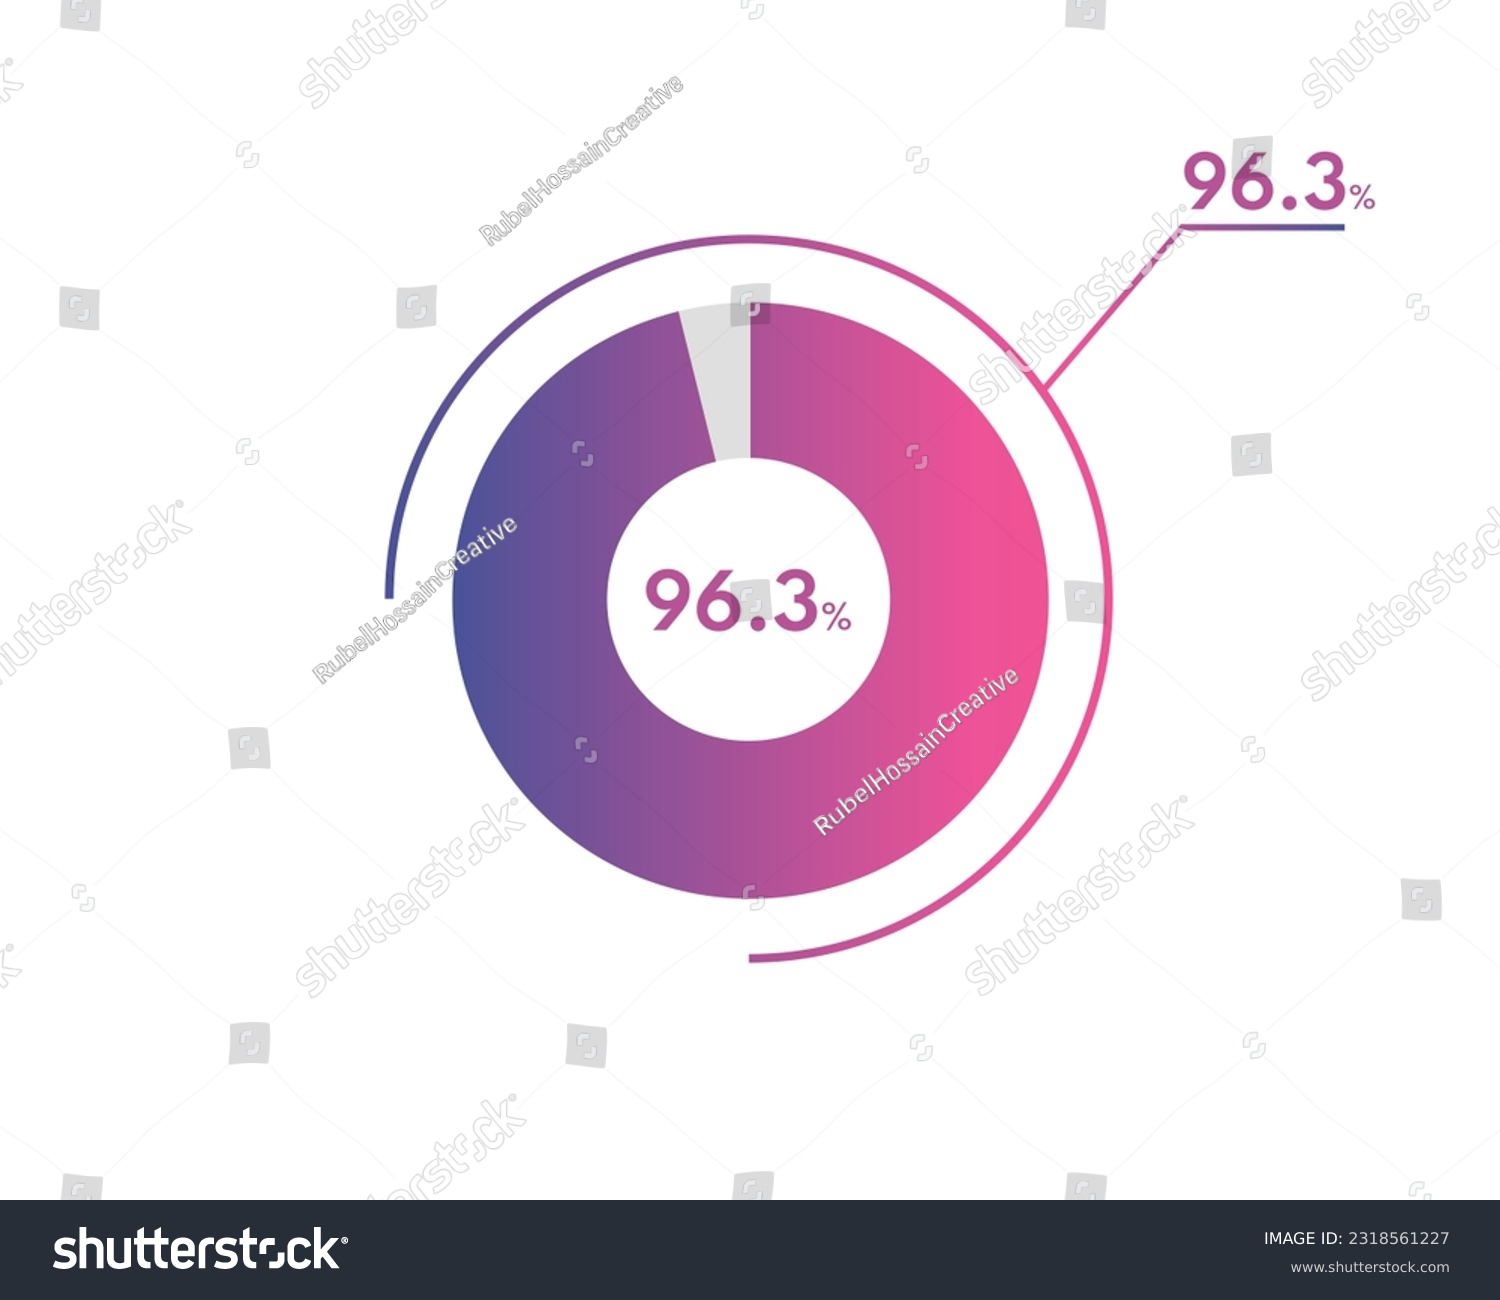 SVG of 96.3 Percentage circle diagrams Infographics vector, circle diagram business illustration, Designing the 96.3% Segment in the Pie Chart. svg